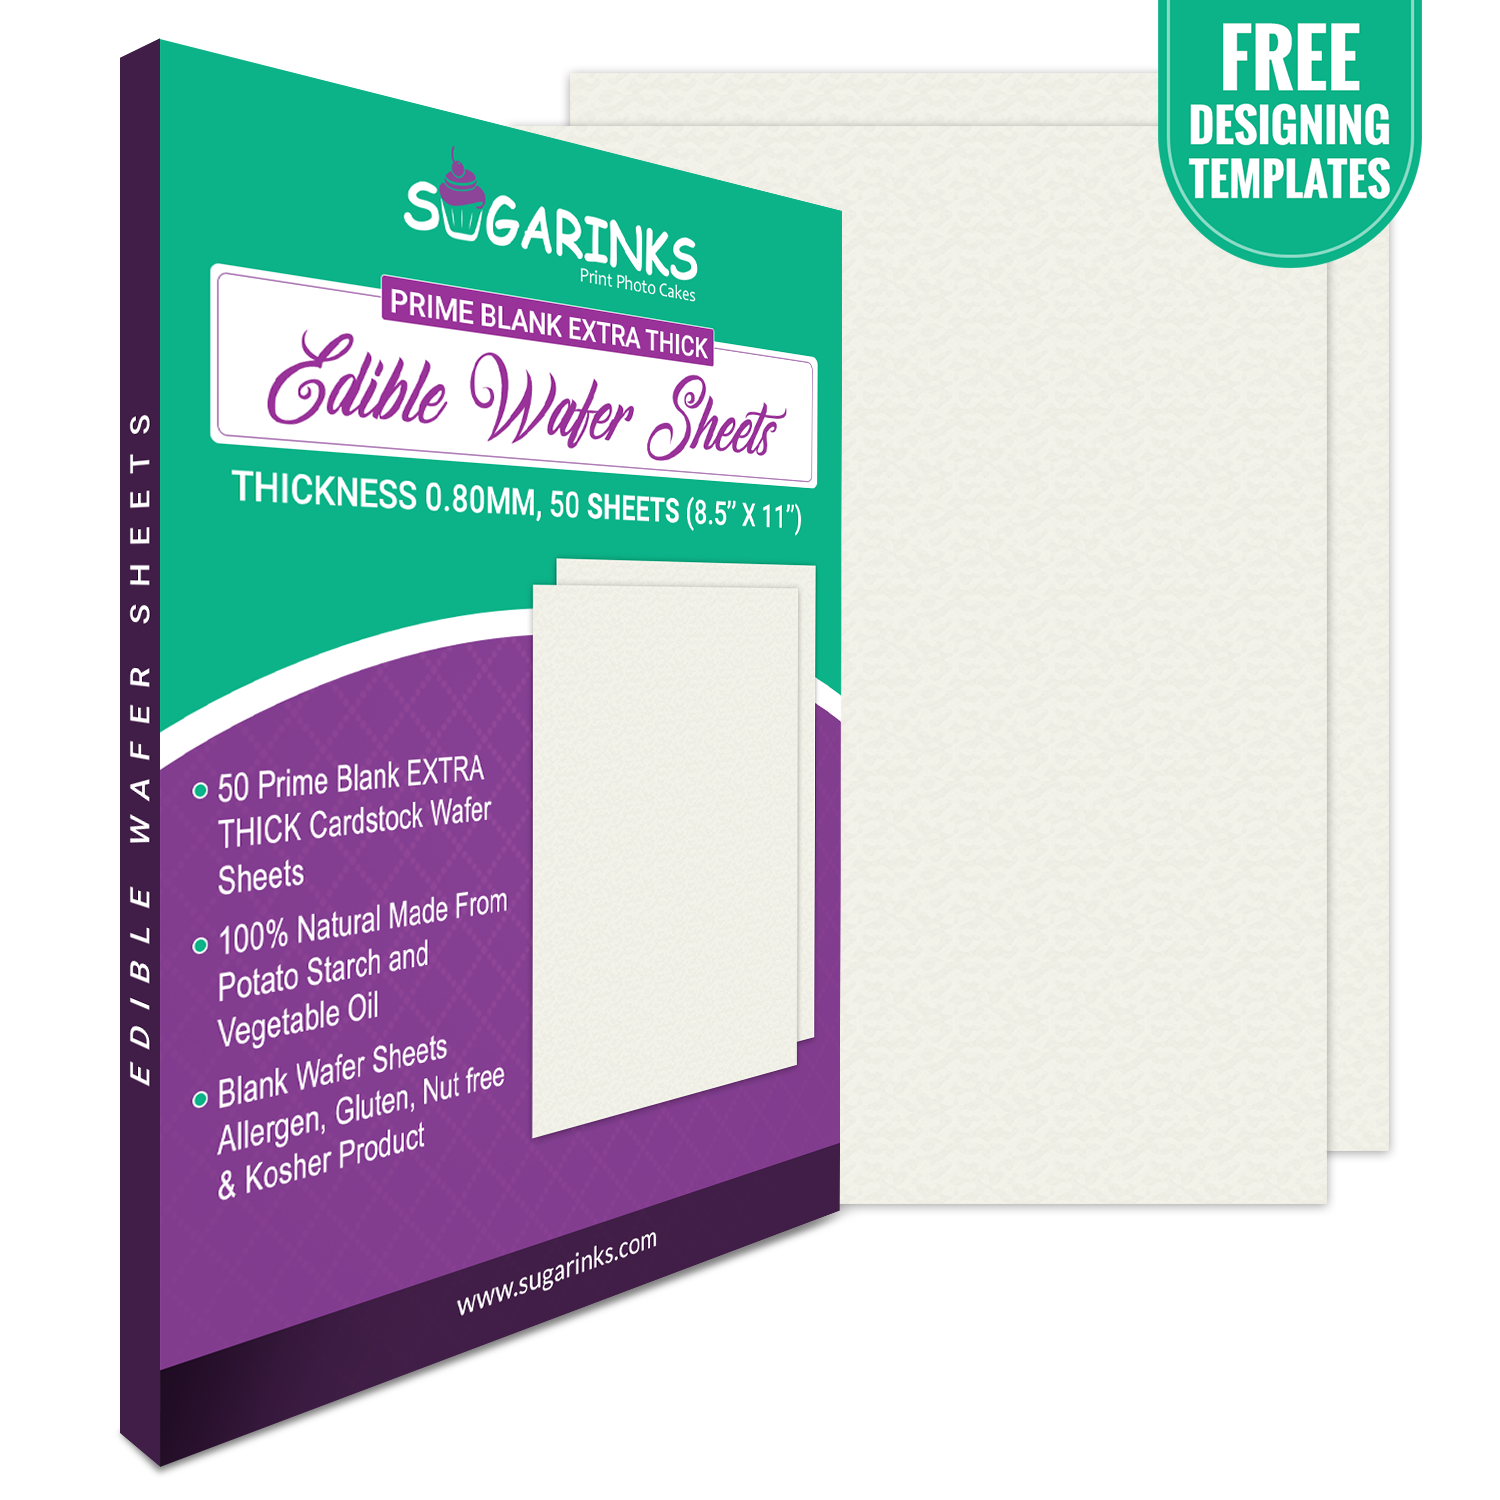 Sugarinks Premium Quality Blank Extra Thick Wafer Sheets (CARDSTOCK) A4 Size (8.5”X11”) Pack of 50 – 0.80mm Thickness